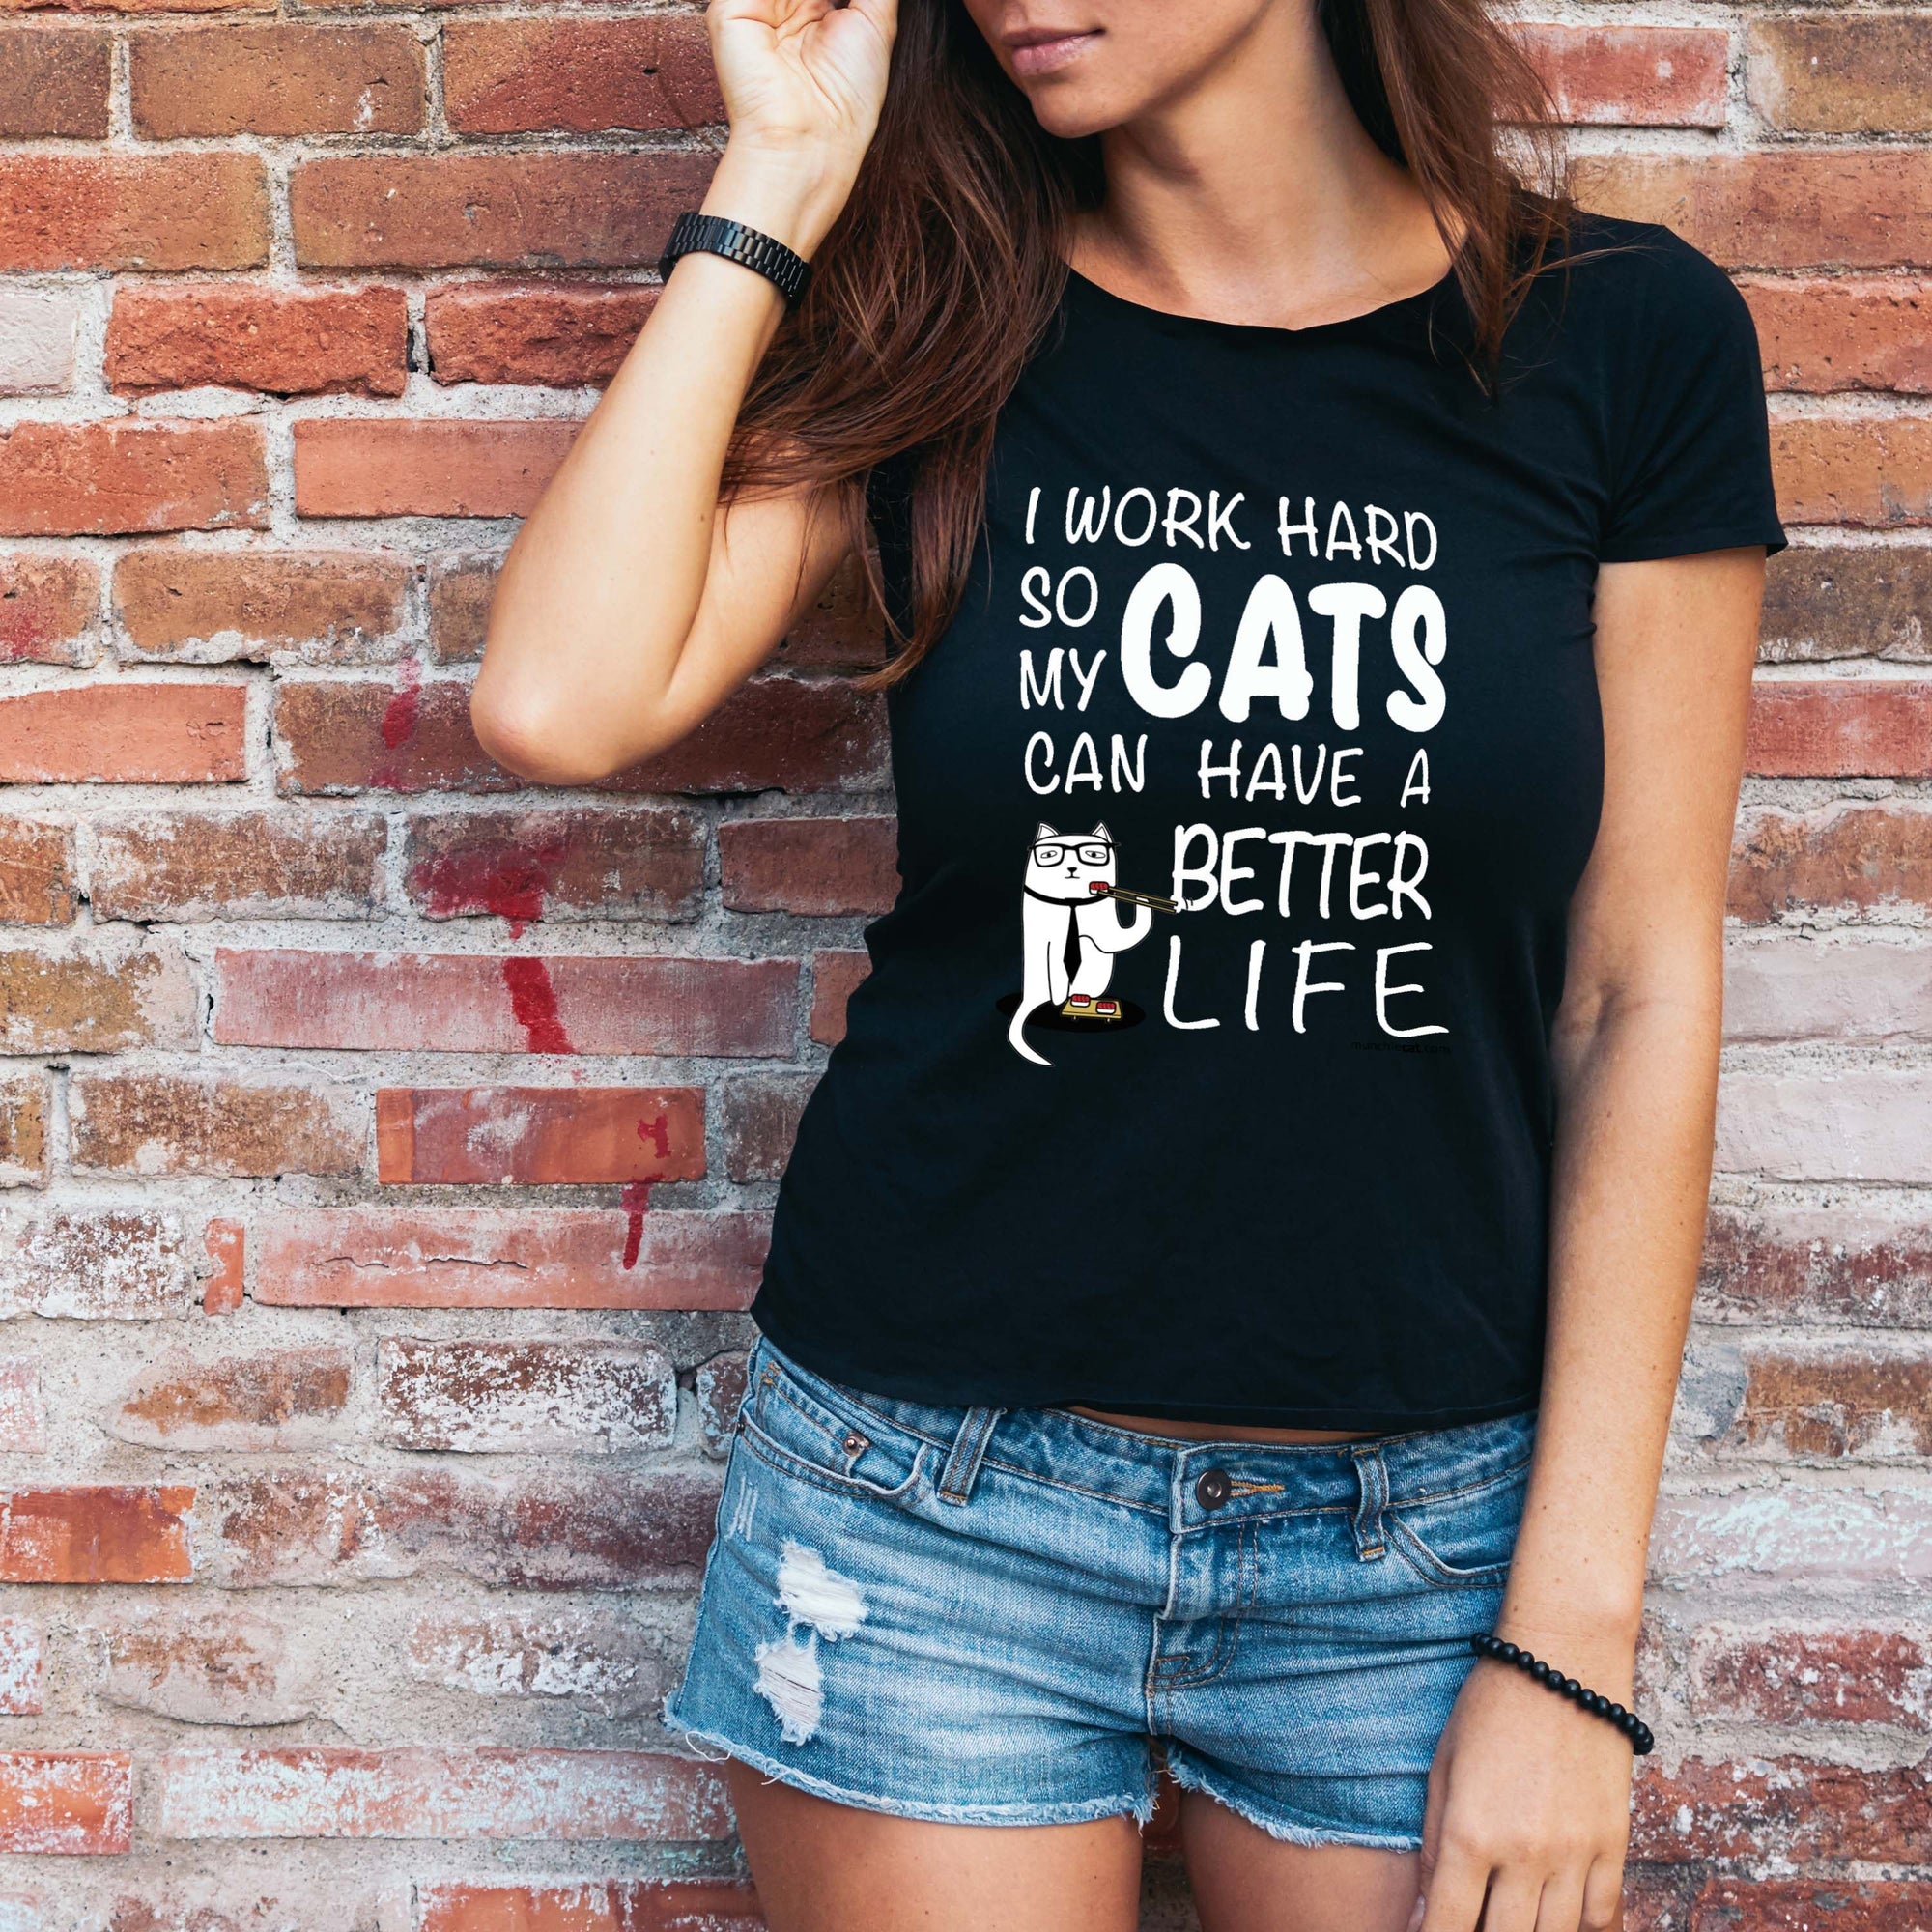 Woman in "I Work Hard So My Cats Can Have a Better Life" from Munchiecat